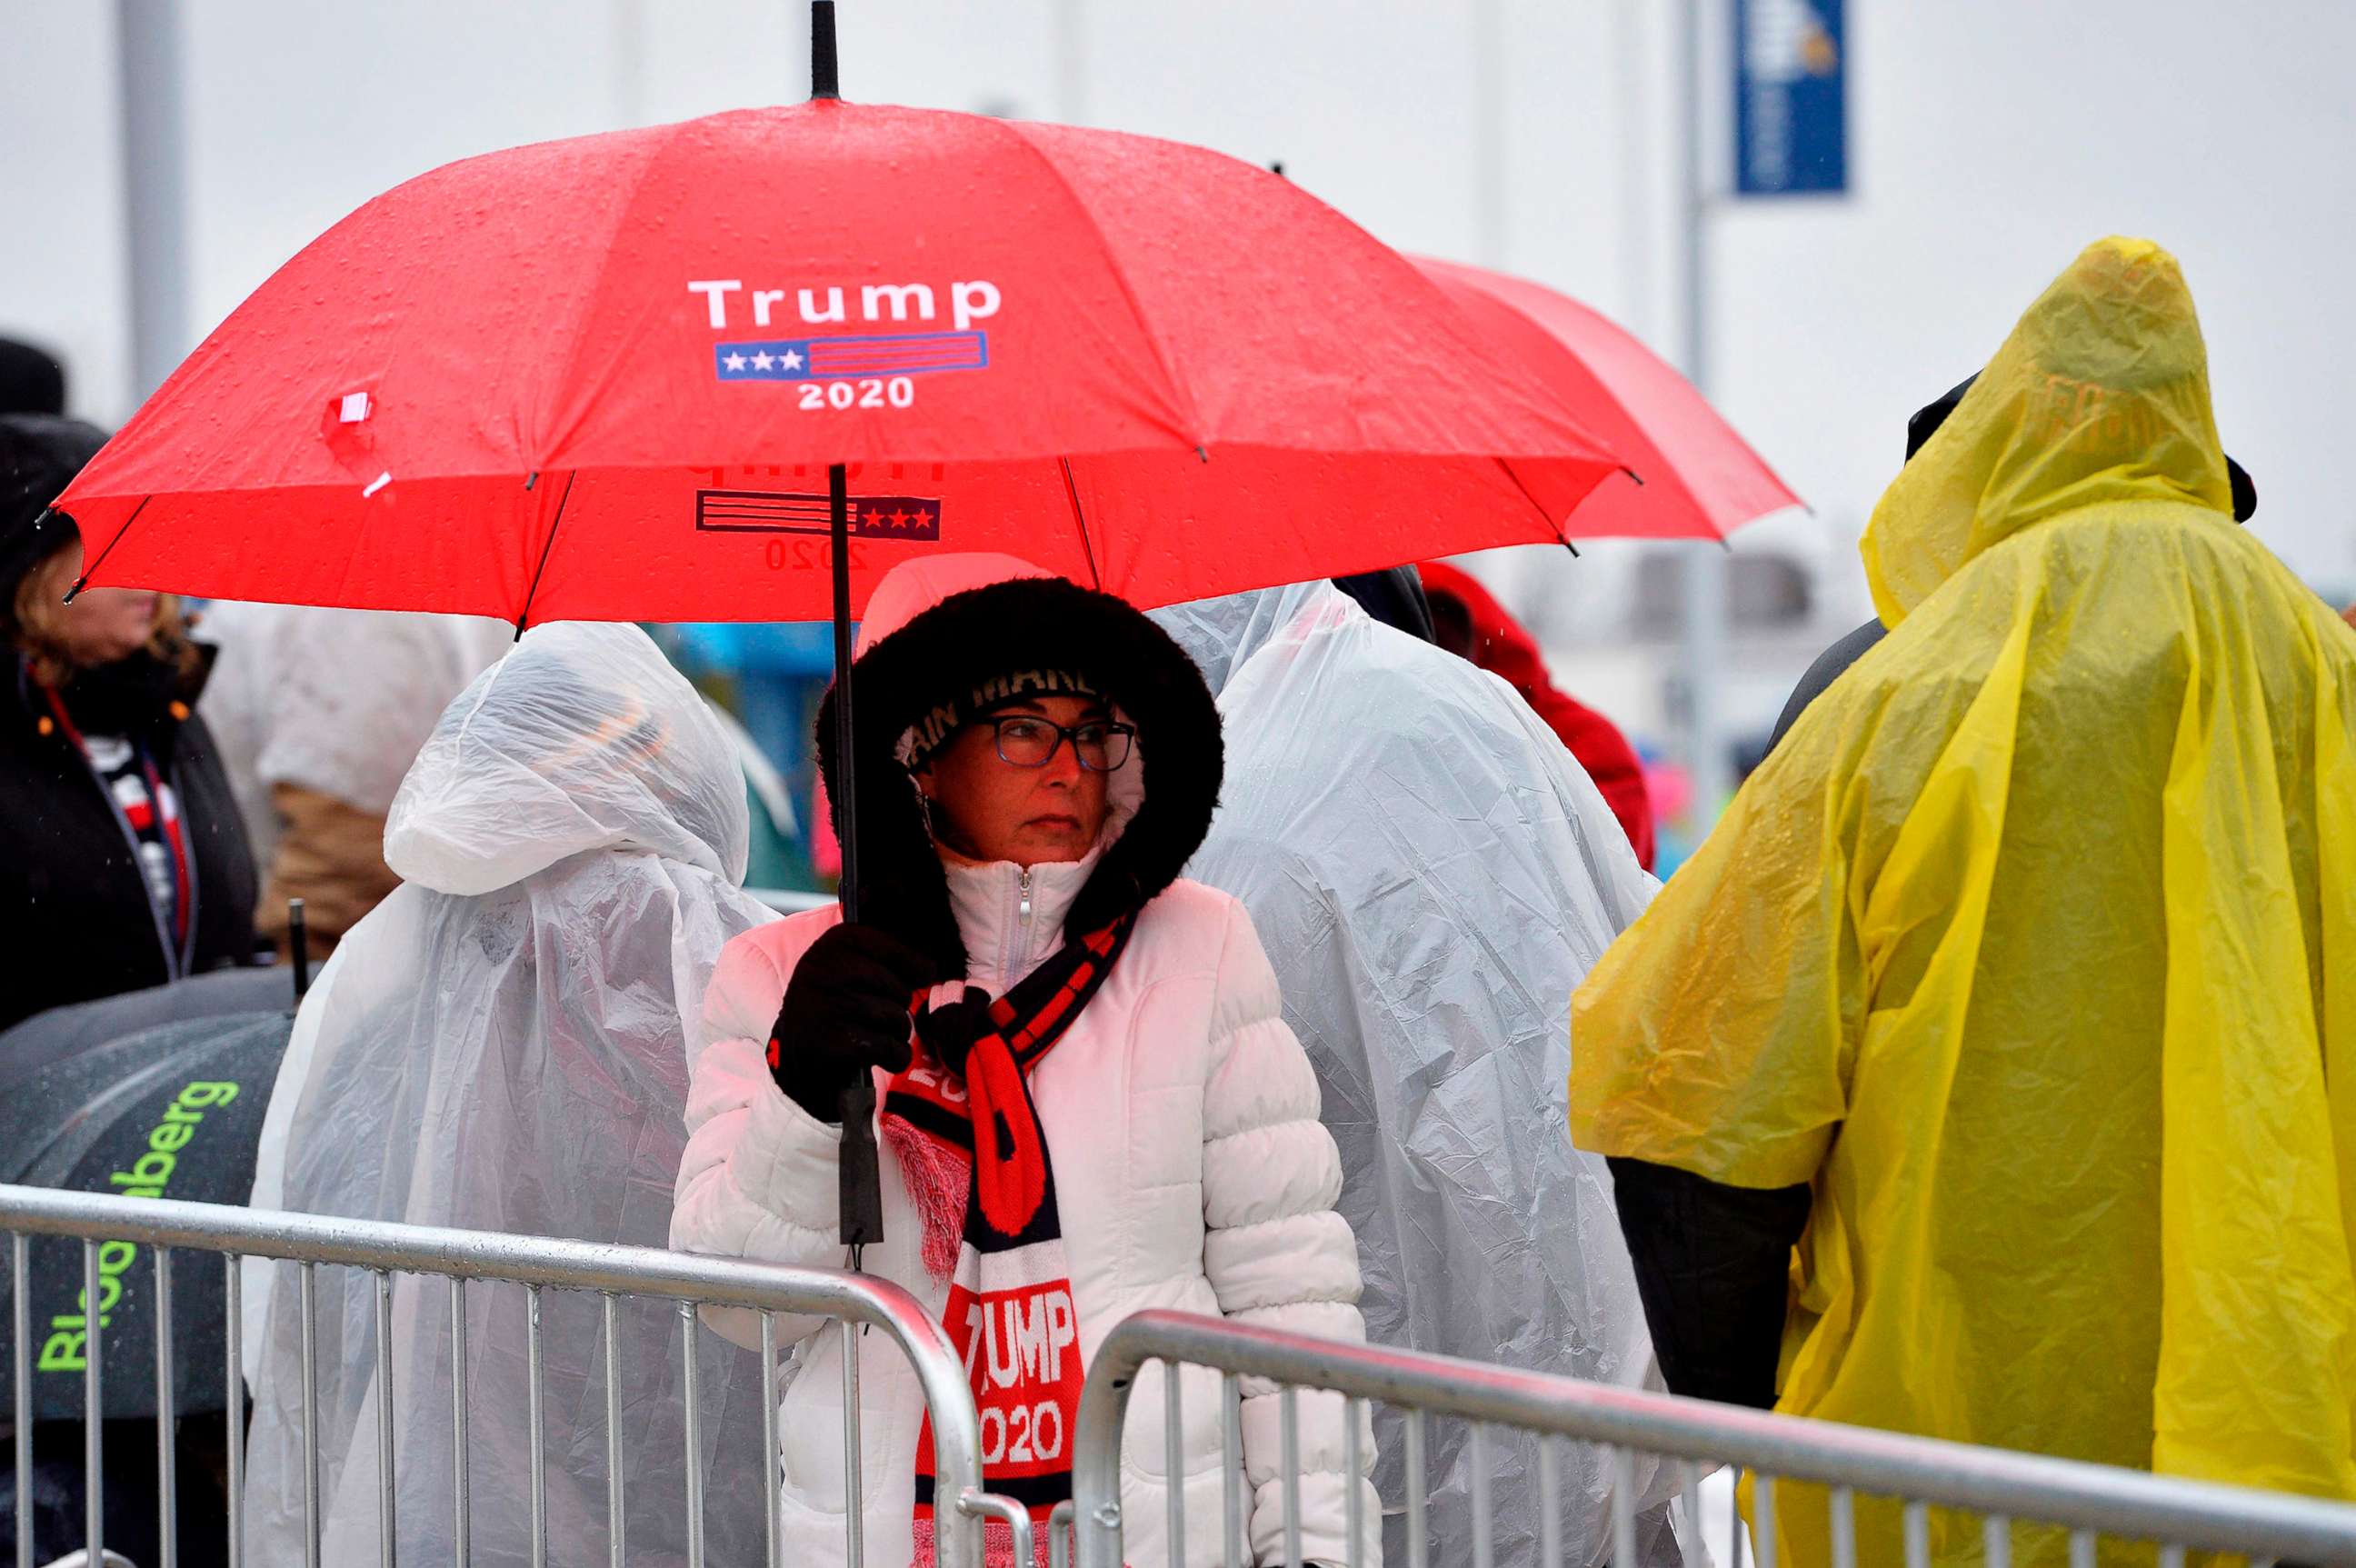 PHOTO: People line up in the rain and icy weather outside the SNHU arena hours ahead of President Donald Trump's rally in Manchester, N.H., Feb. 10, 2020.